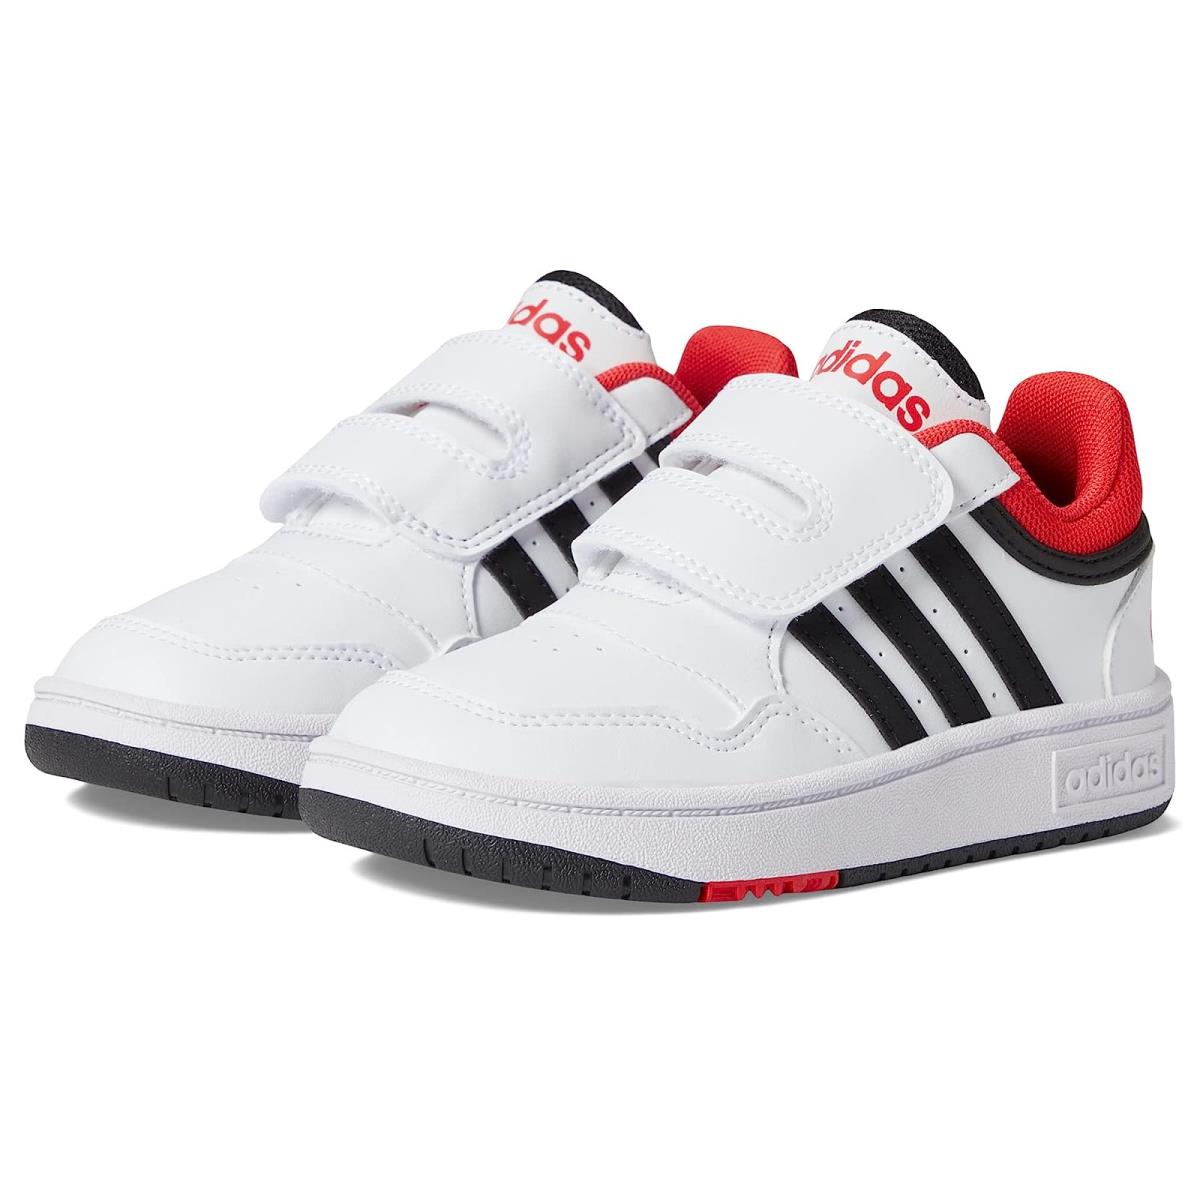 Boy`s Sneakers Athletic Shoes Adidas Kids Hoops Toddler White/Black/Bright Red